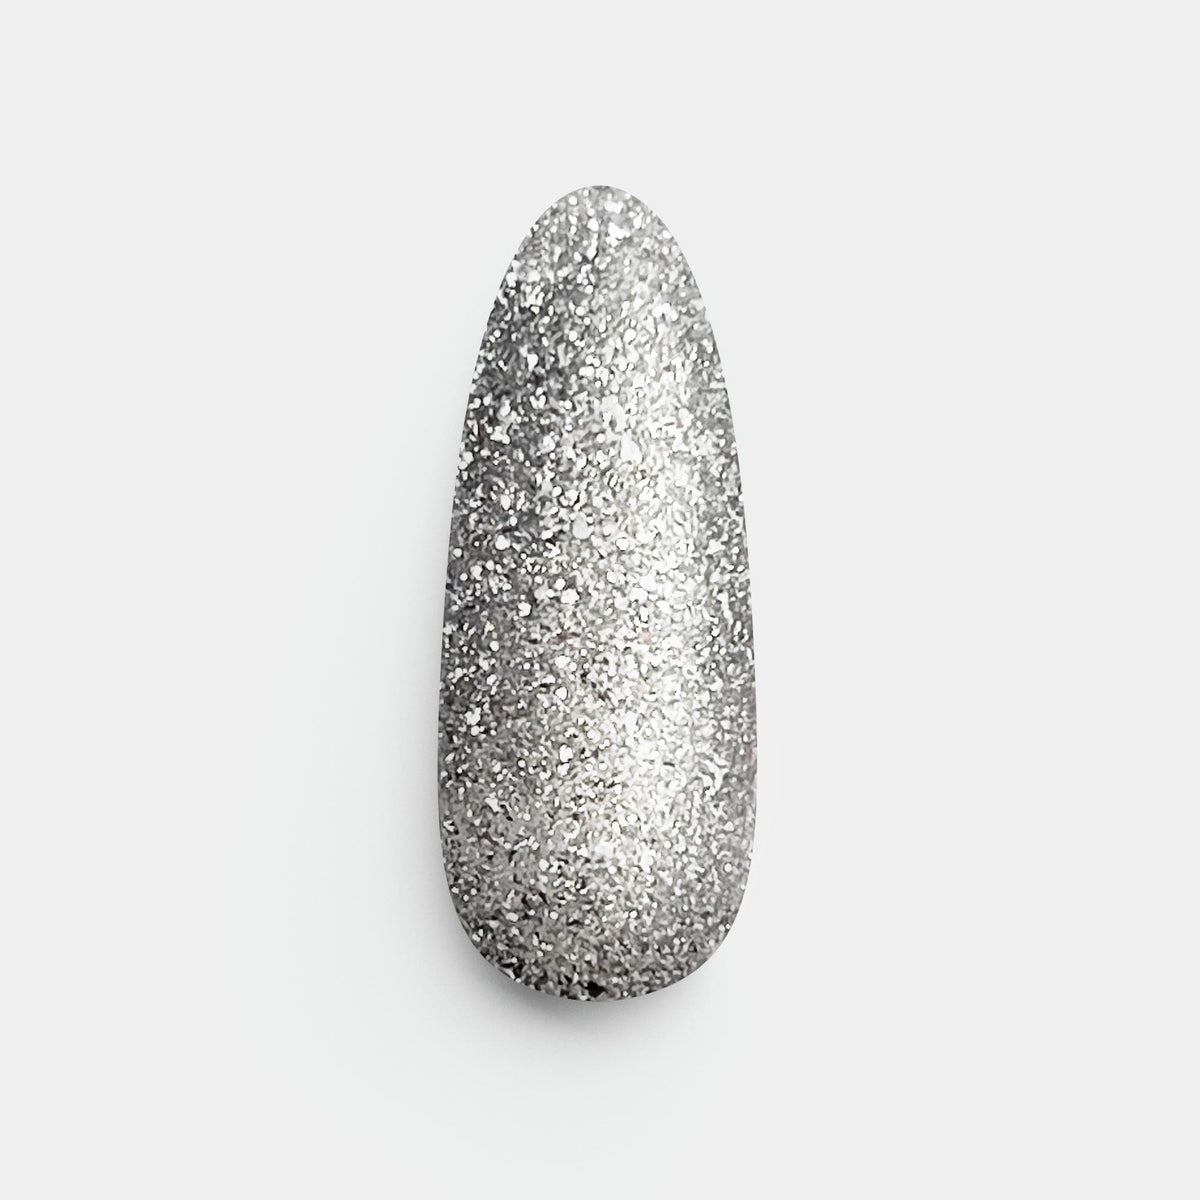 Gelous Silver Lining matte gel nail polish swatch - photographed in America